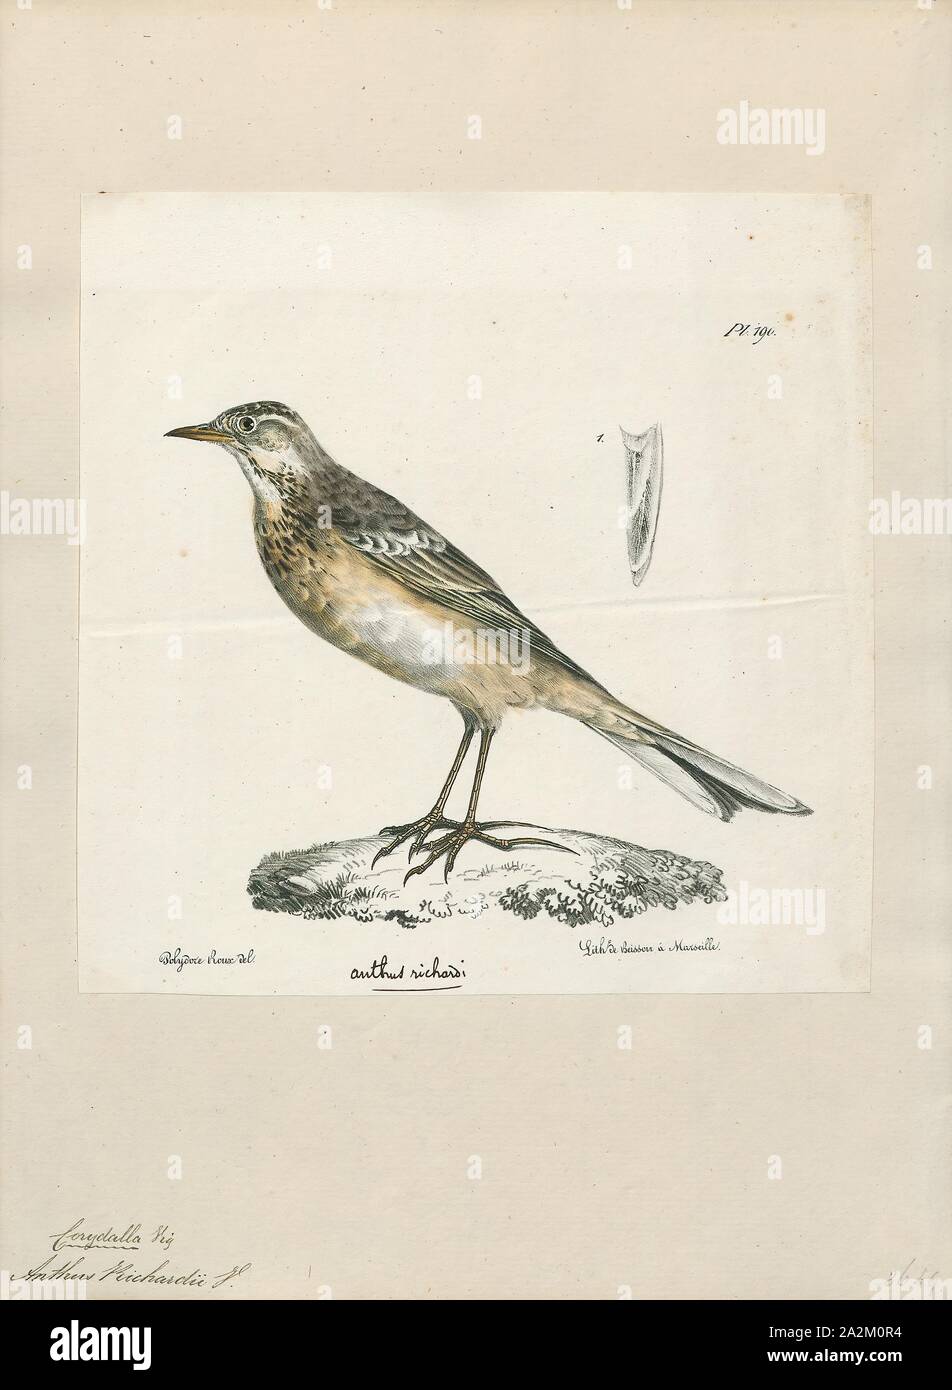 Anthus richardi, Print, Richard's pipit (Anthus richardi) is a medium-sized passerine bird which breeds in open grasslands in northern Asia. It is a long-distance migrant moving to open lowlands in the Indian subcontinent and Southeast Asia. It is a rare but regular vagrant to western Europe., 1825-1830 Stock Photo